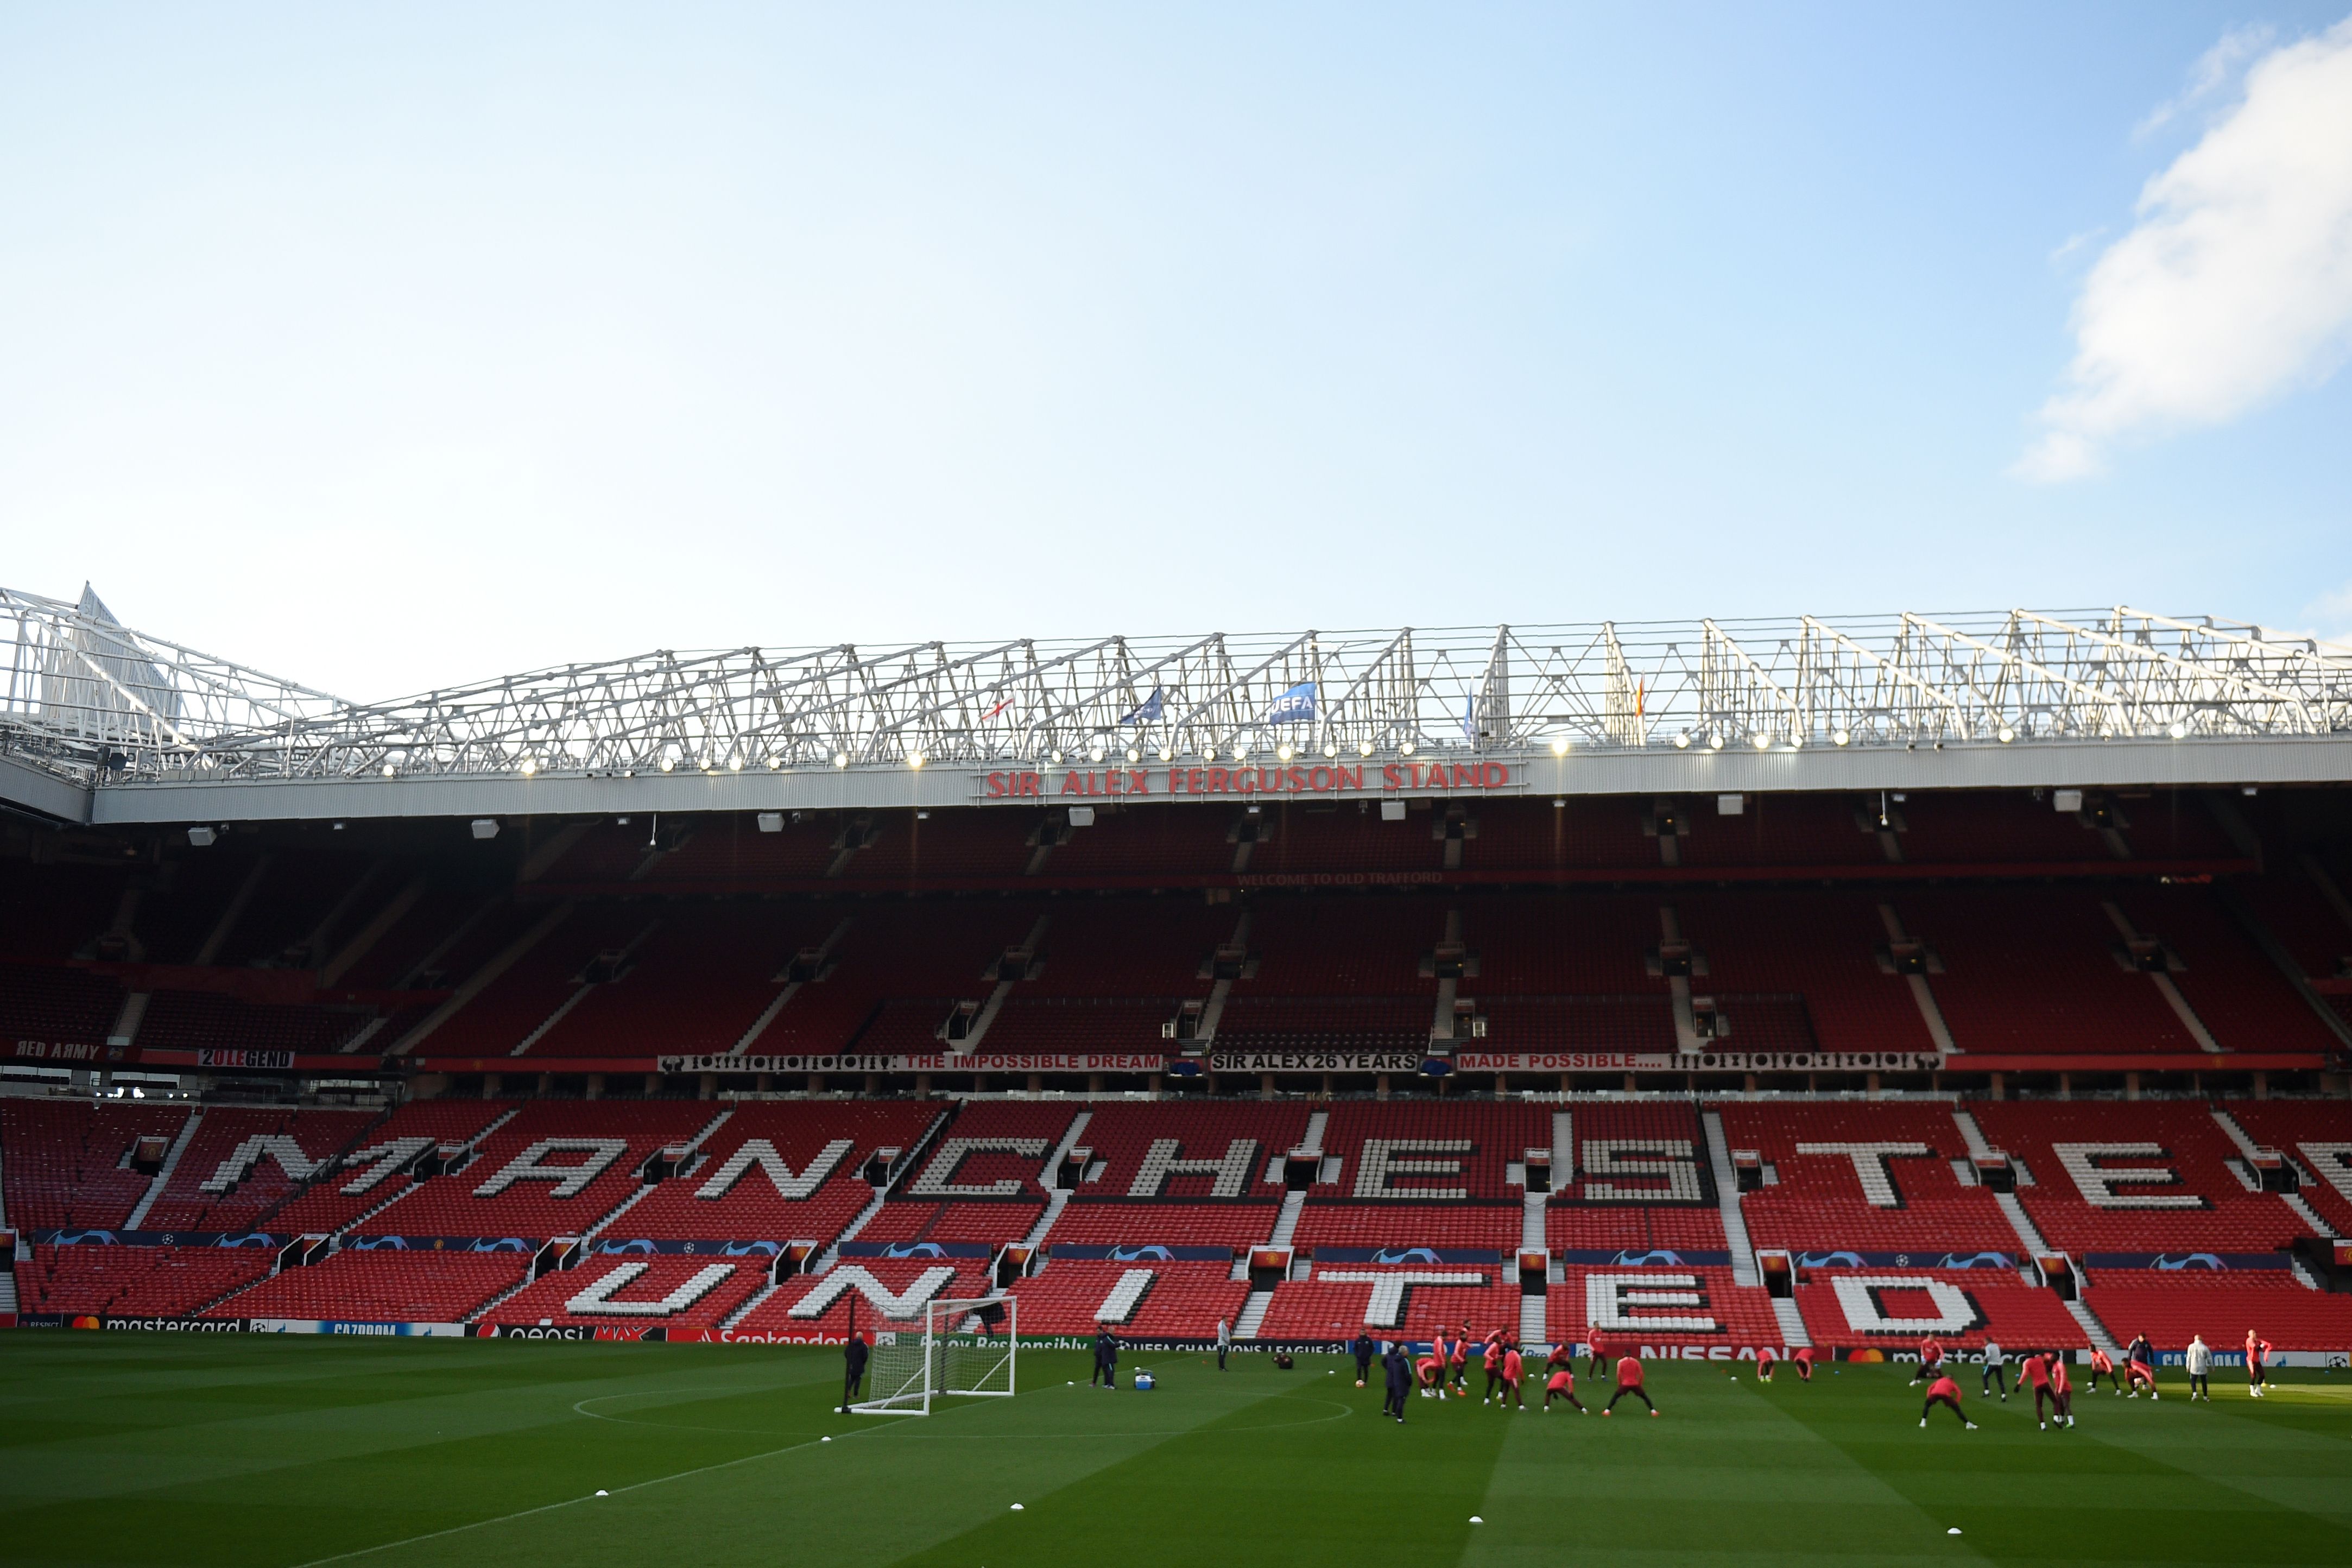 Barcelona's players attend a training session at Old Trafford stadium in Manchester, north west England on April 9, 2019, on the eve of their UEFA Champions League quarter final first leg football match against Manchester United. (Photo by Oli SCARFF / AFP)        (Photo credit should read OLI SCARFF/AFP/Getty Images)